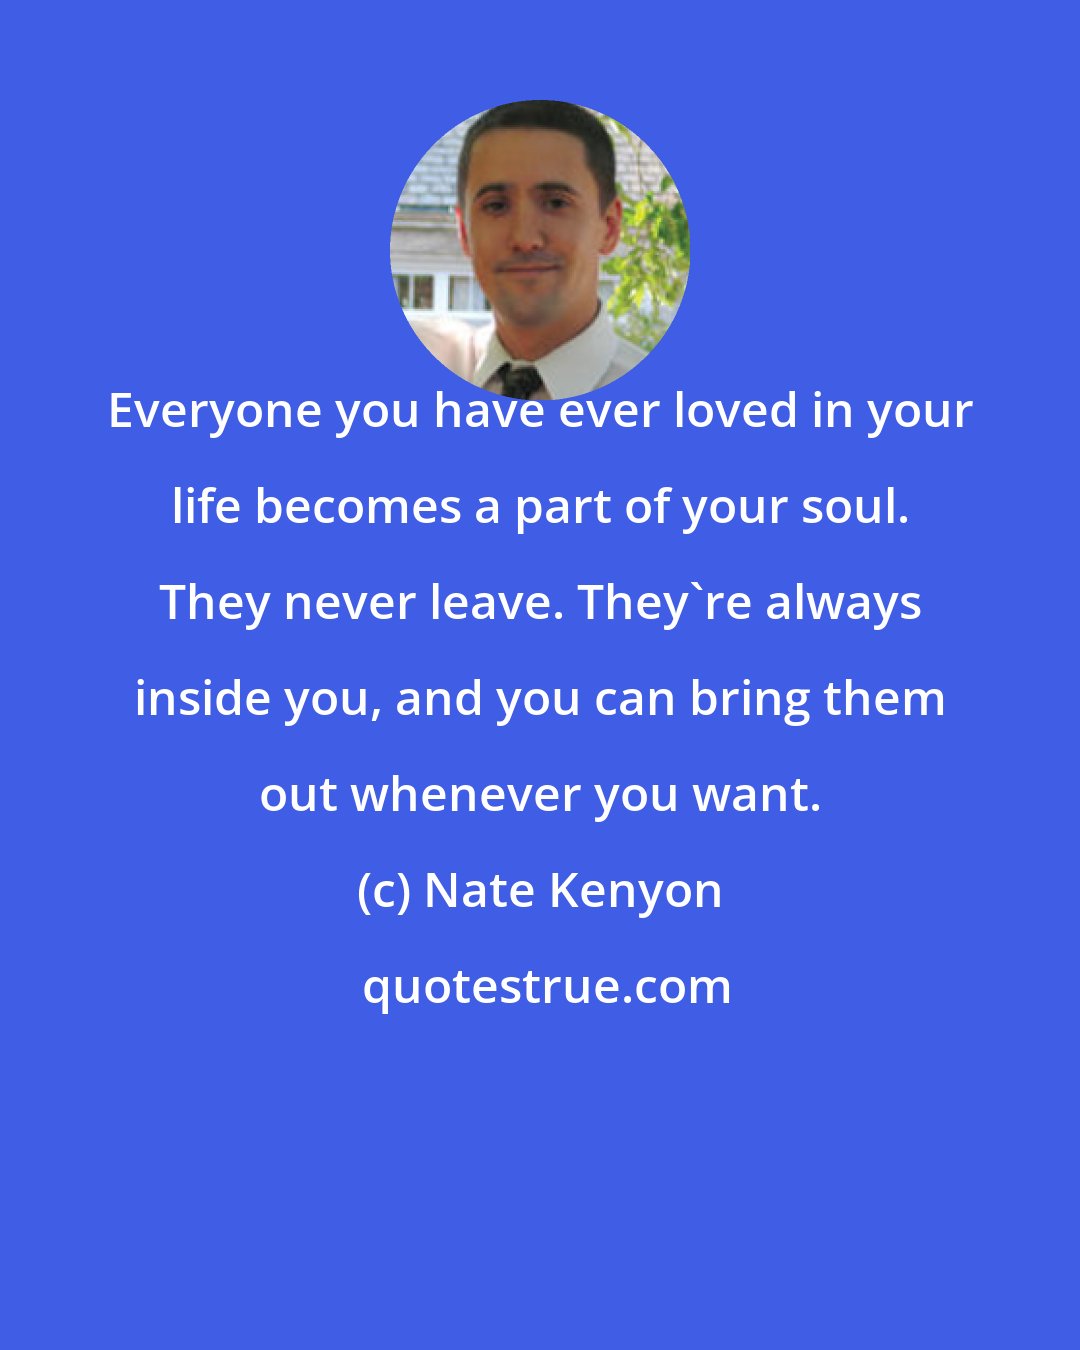 Nate Kenyon: Everyone you have ever loved in your life becomes a part of your soul. They never leave. They're always inside you, and you can bring them out whenever you want.